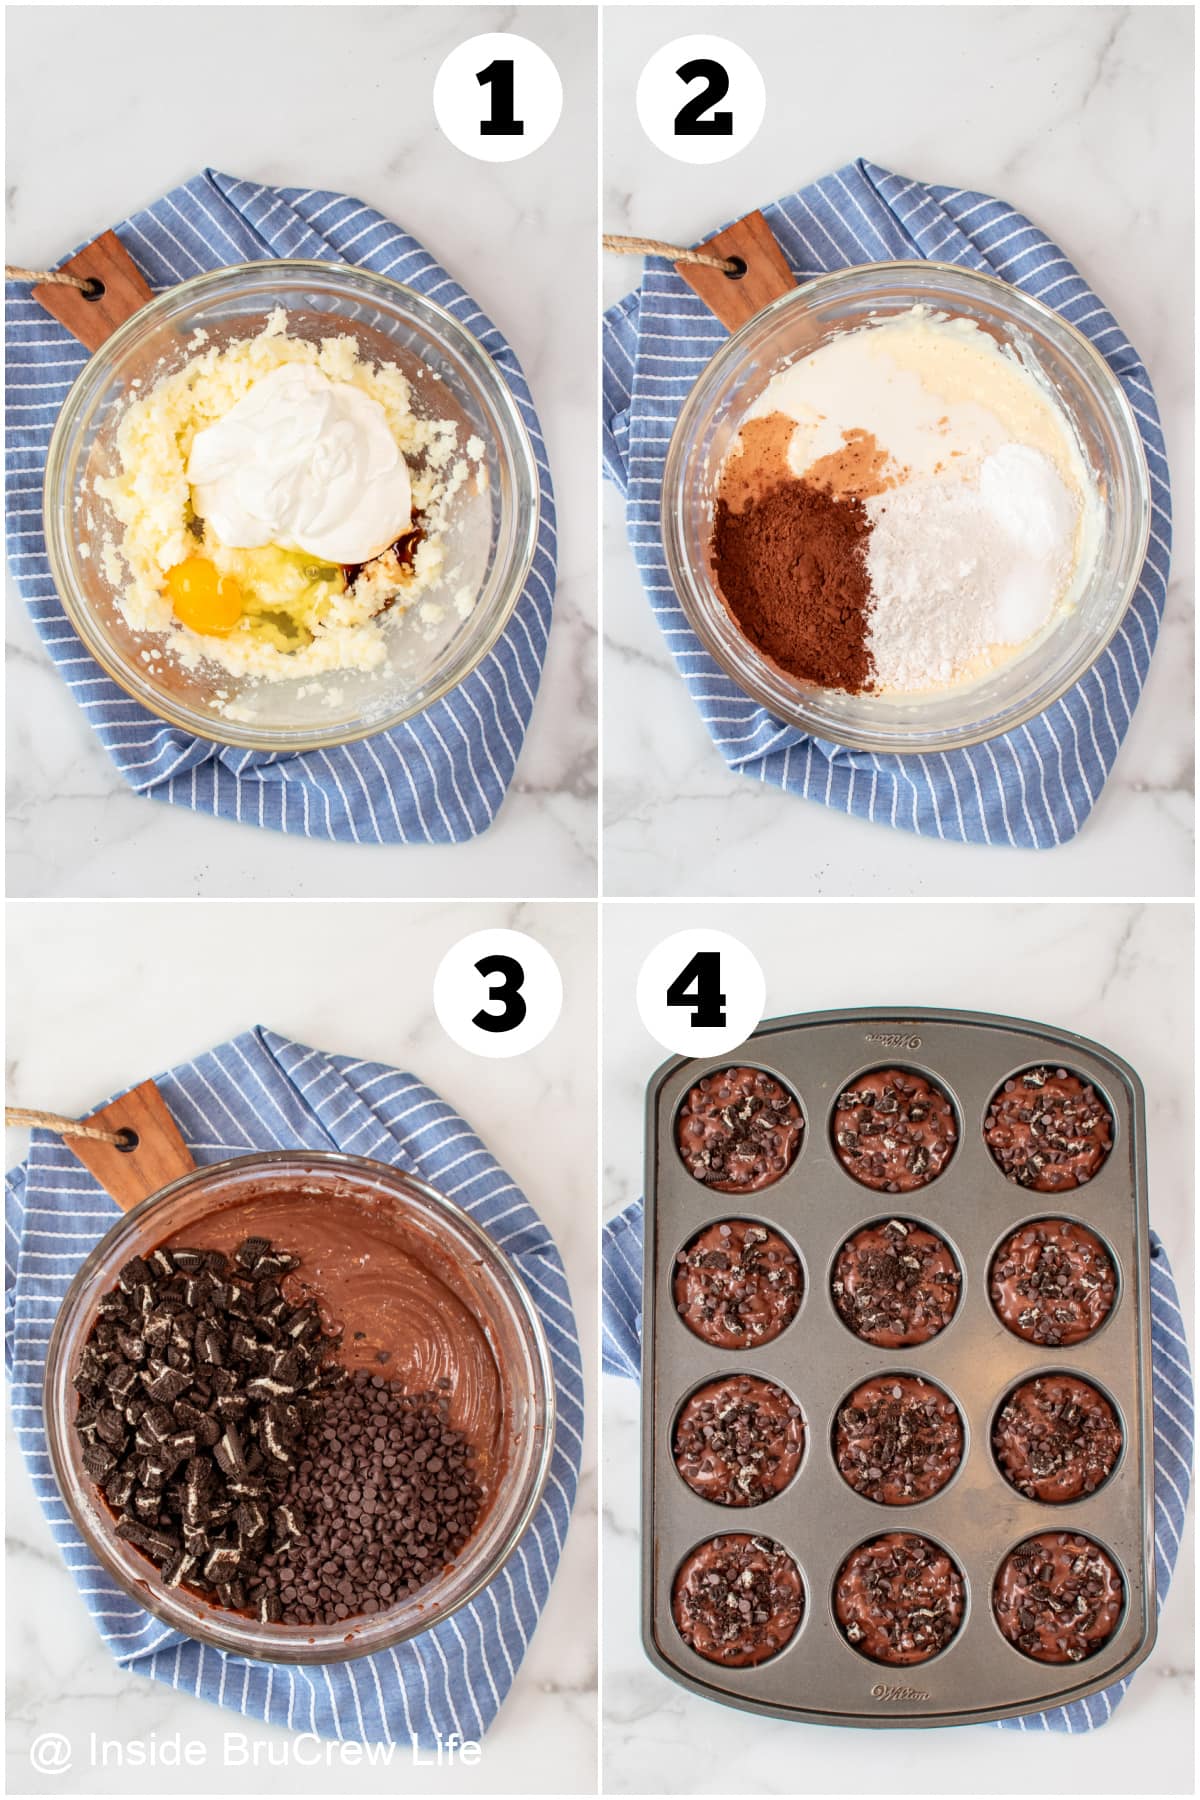 Four pictures collaged together showing how to make muffins.